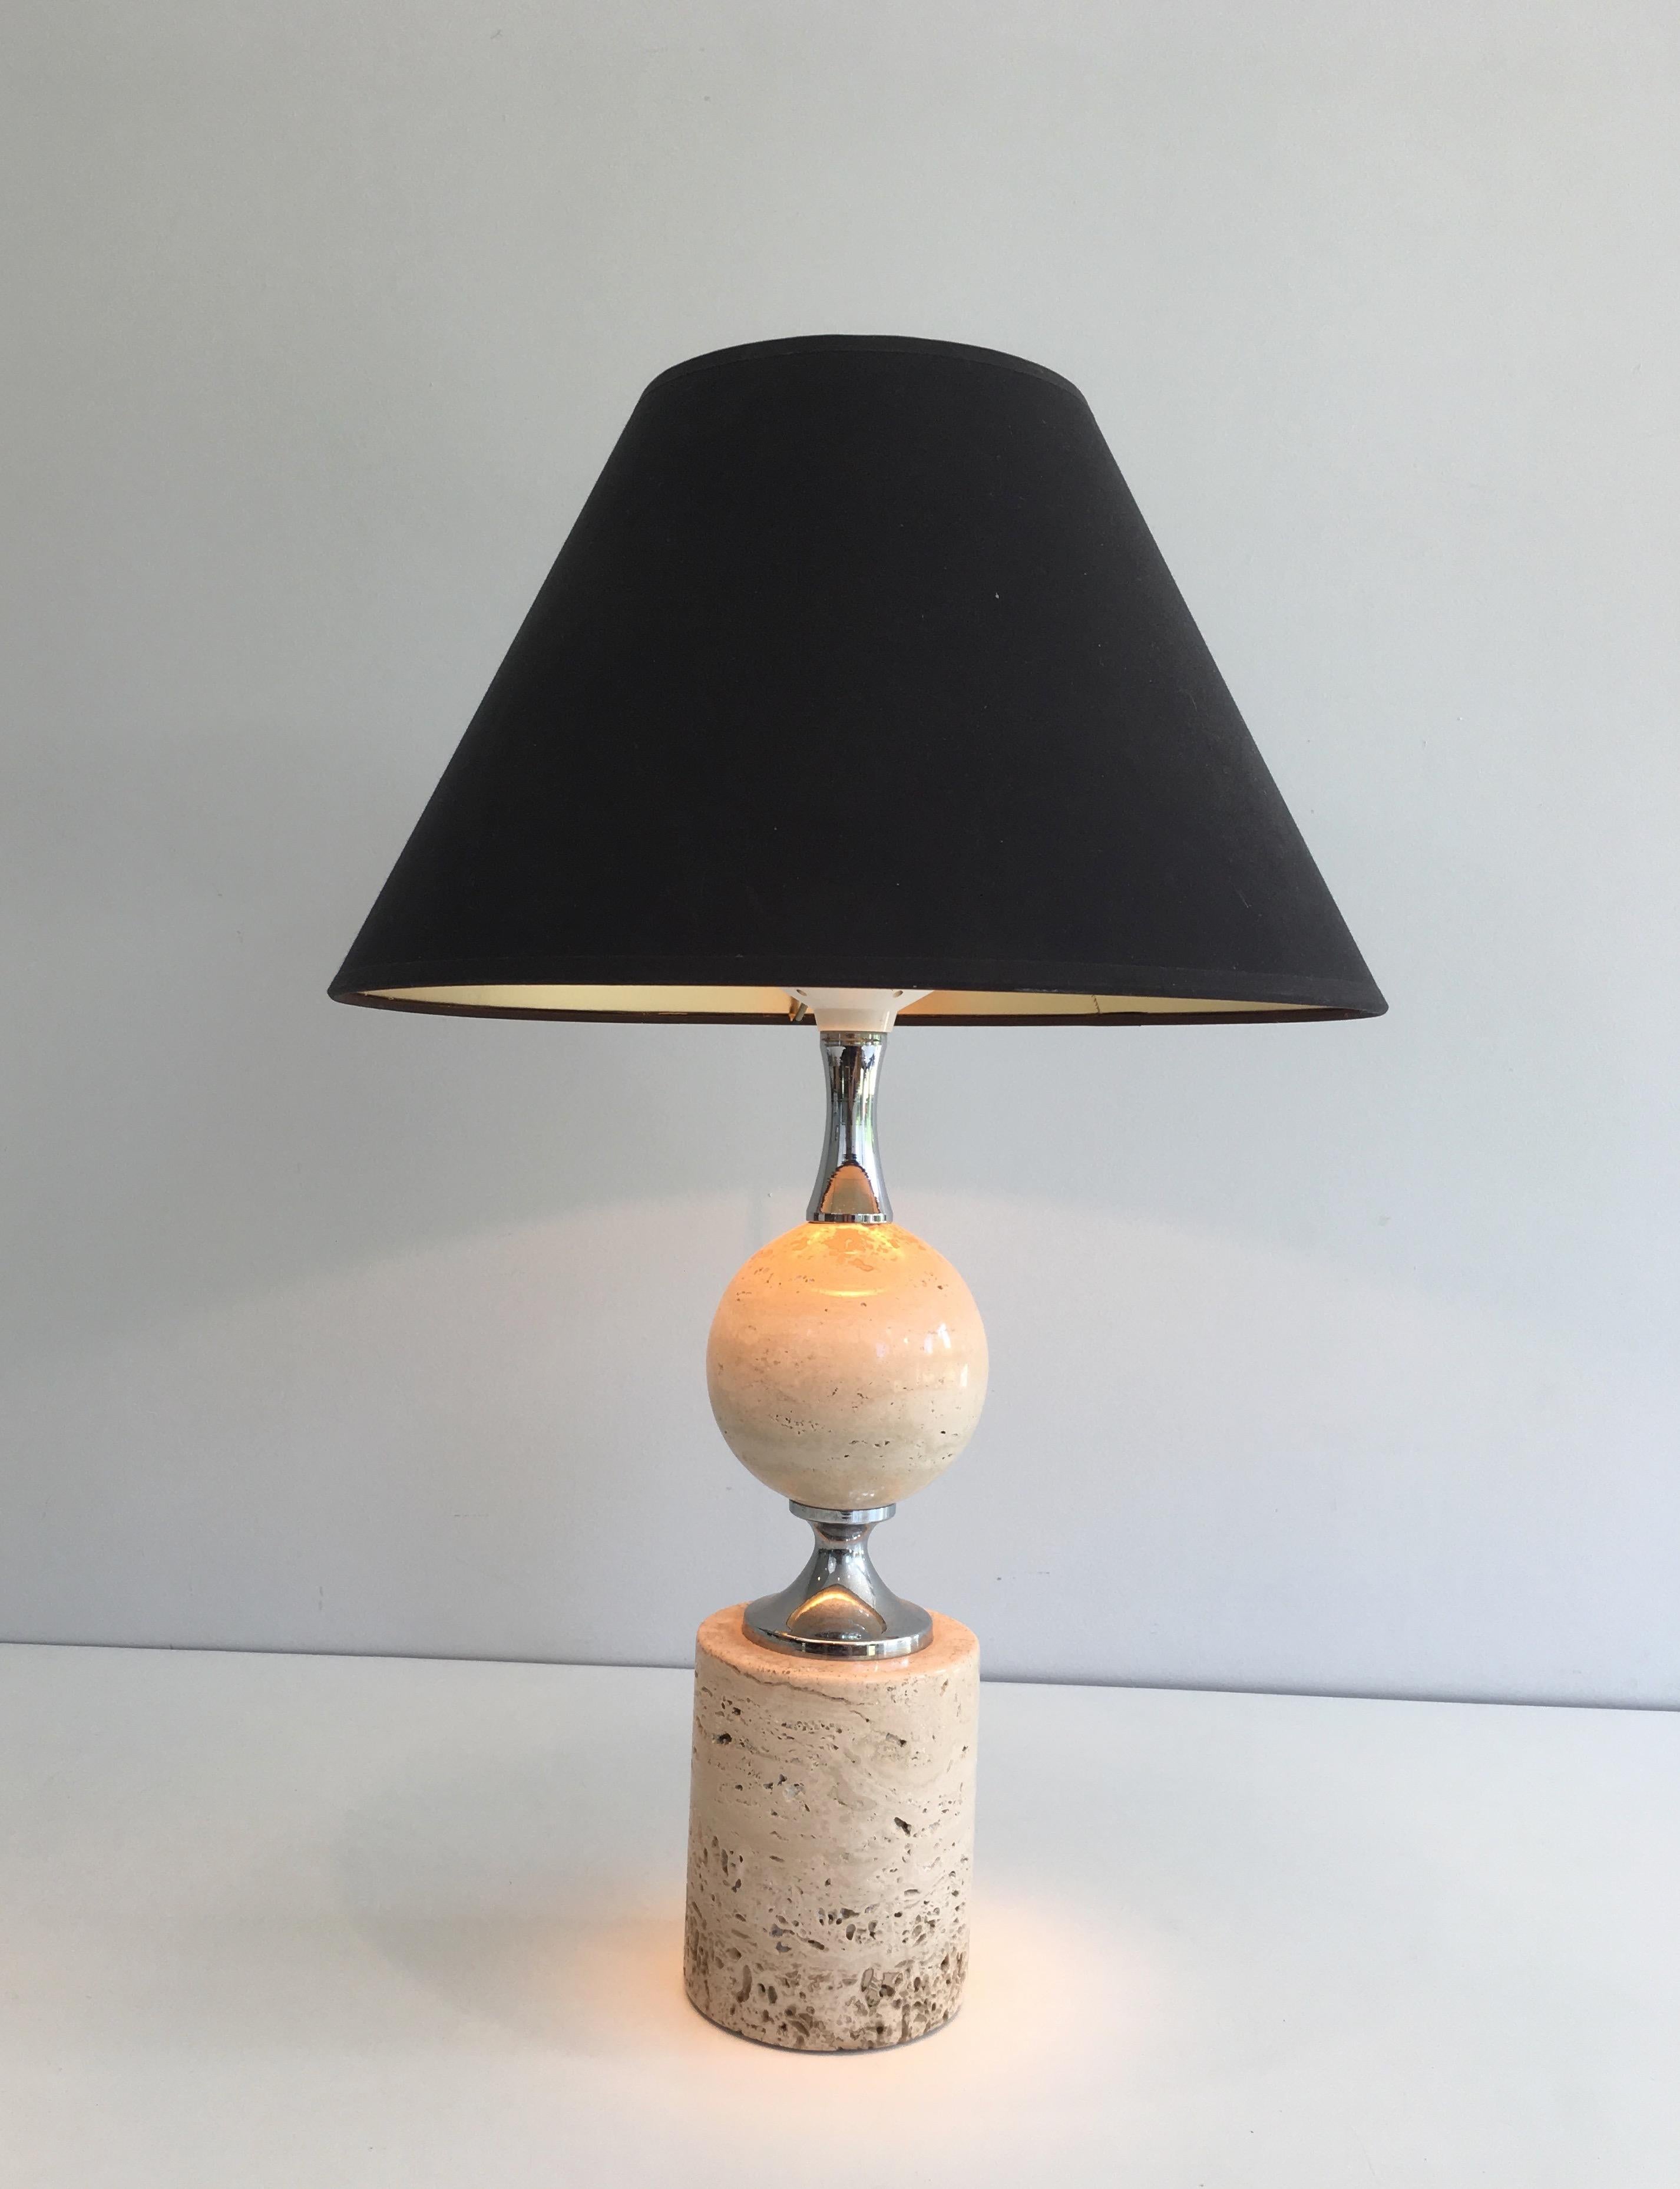 This nice table lamp is made of travertine and chrome. This is a work by famous French designer Philippe Barbier, circa 1970.